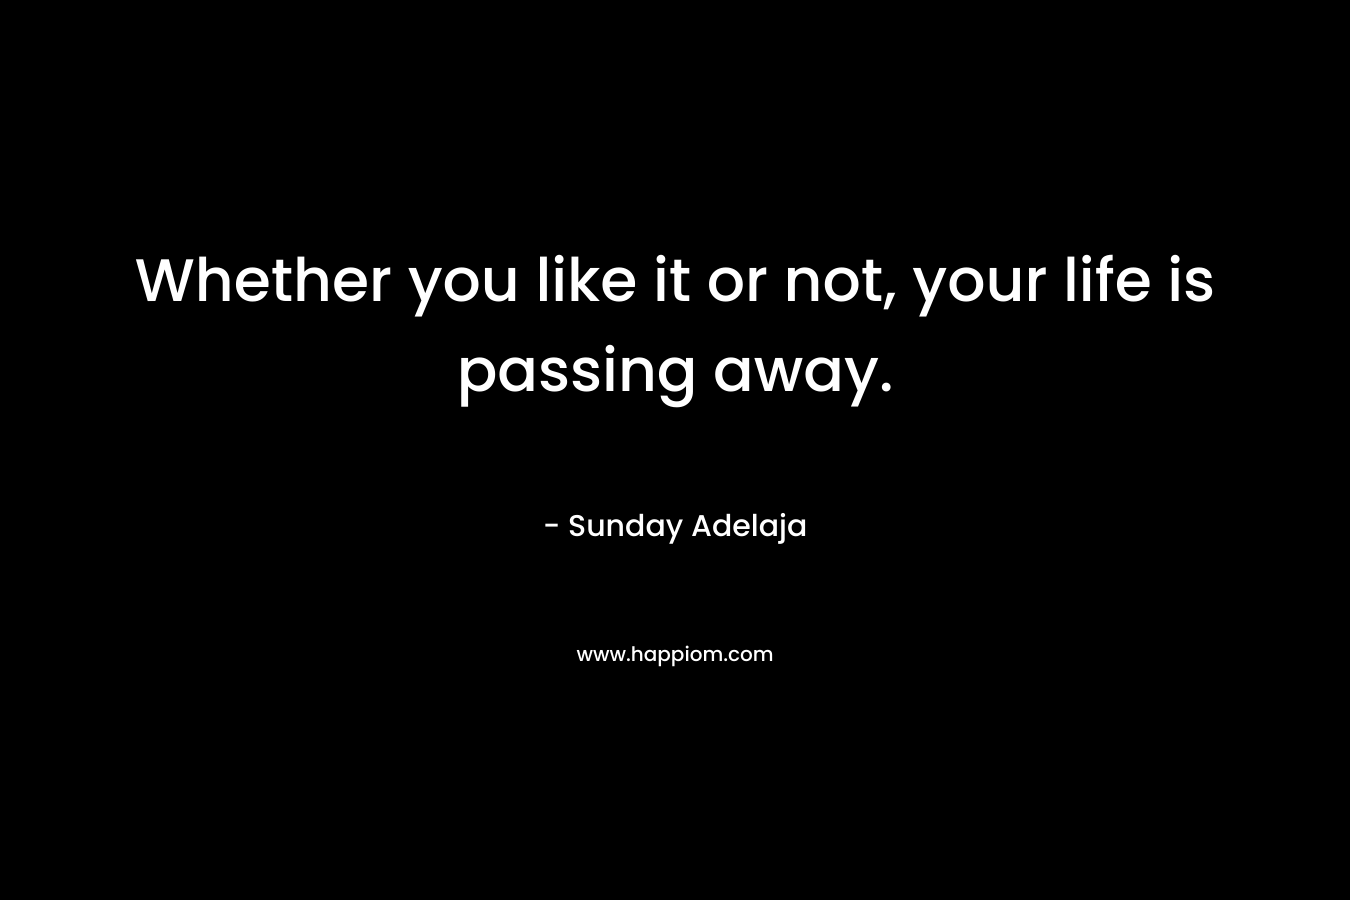 Whether you like it or not, your life is passing away.